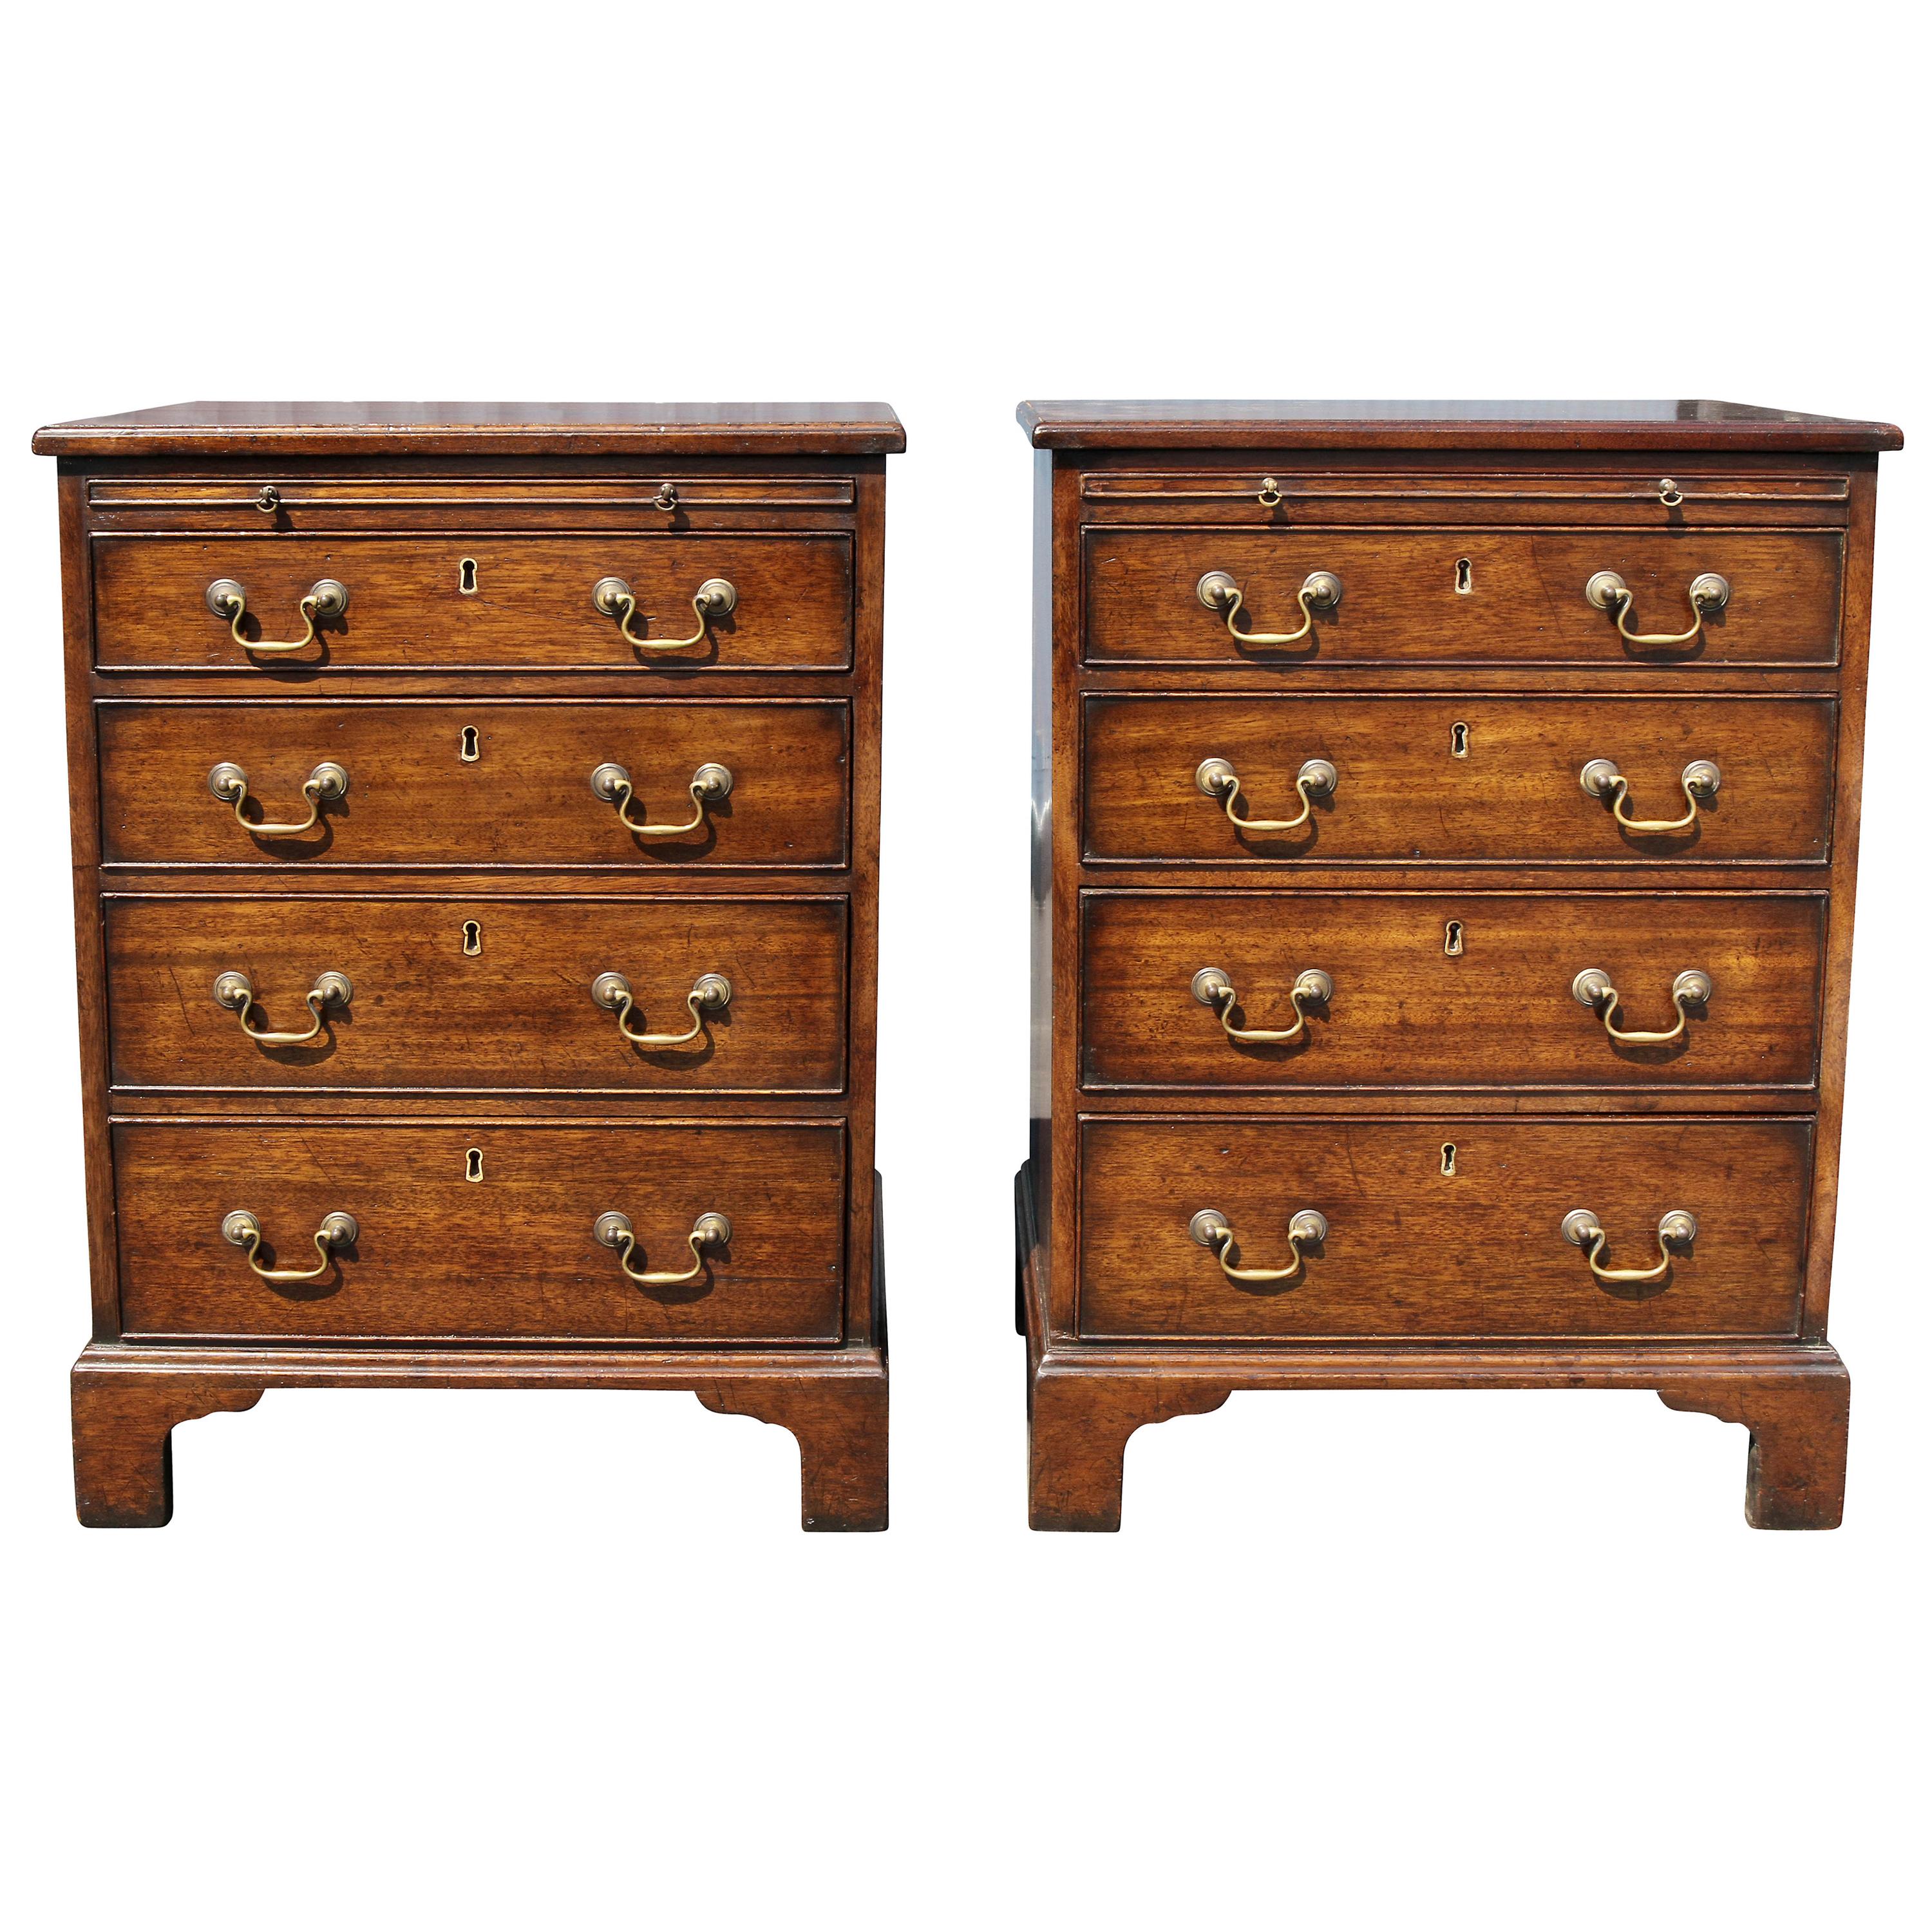 Pair of George III Style Mahogany Bachelor Chests of Drawers